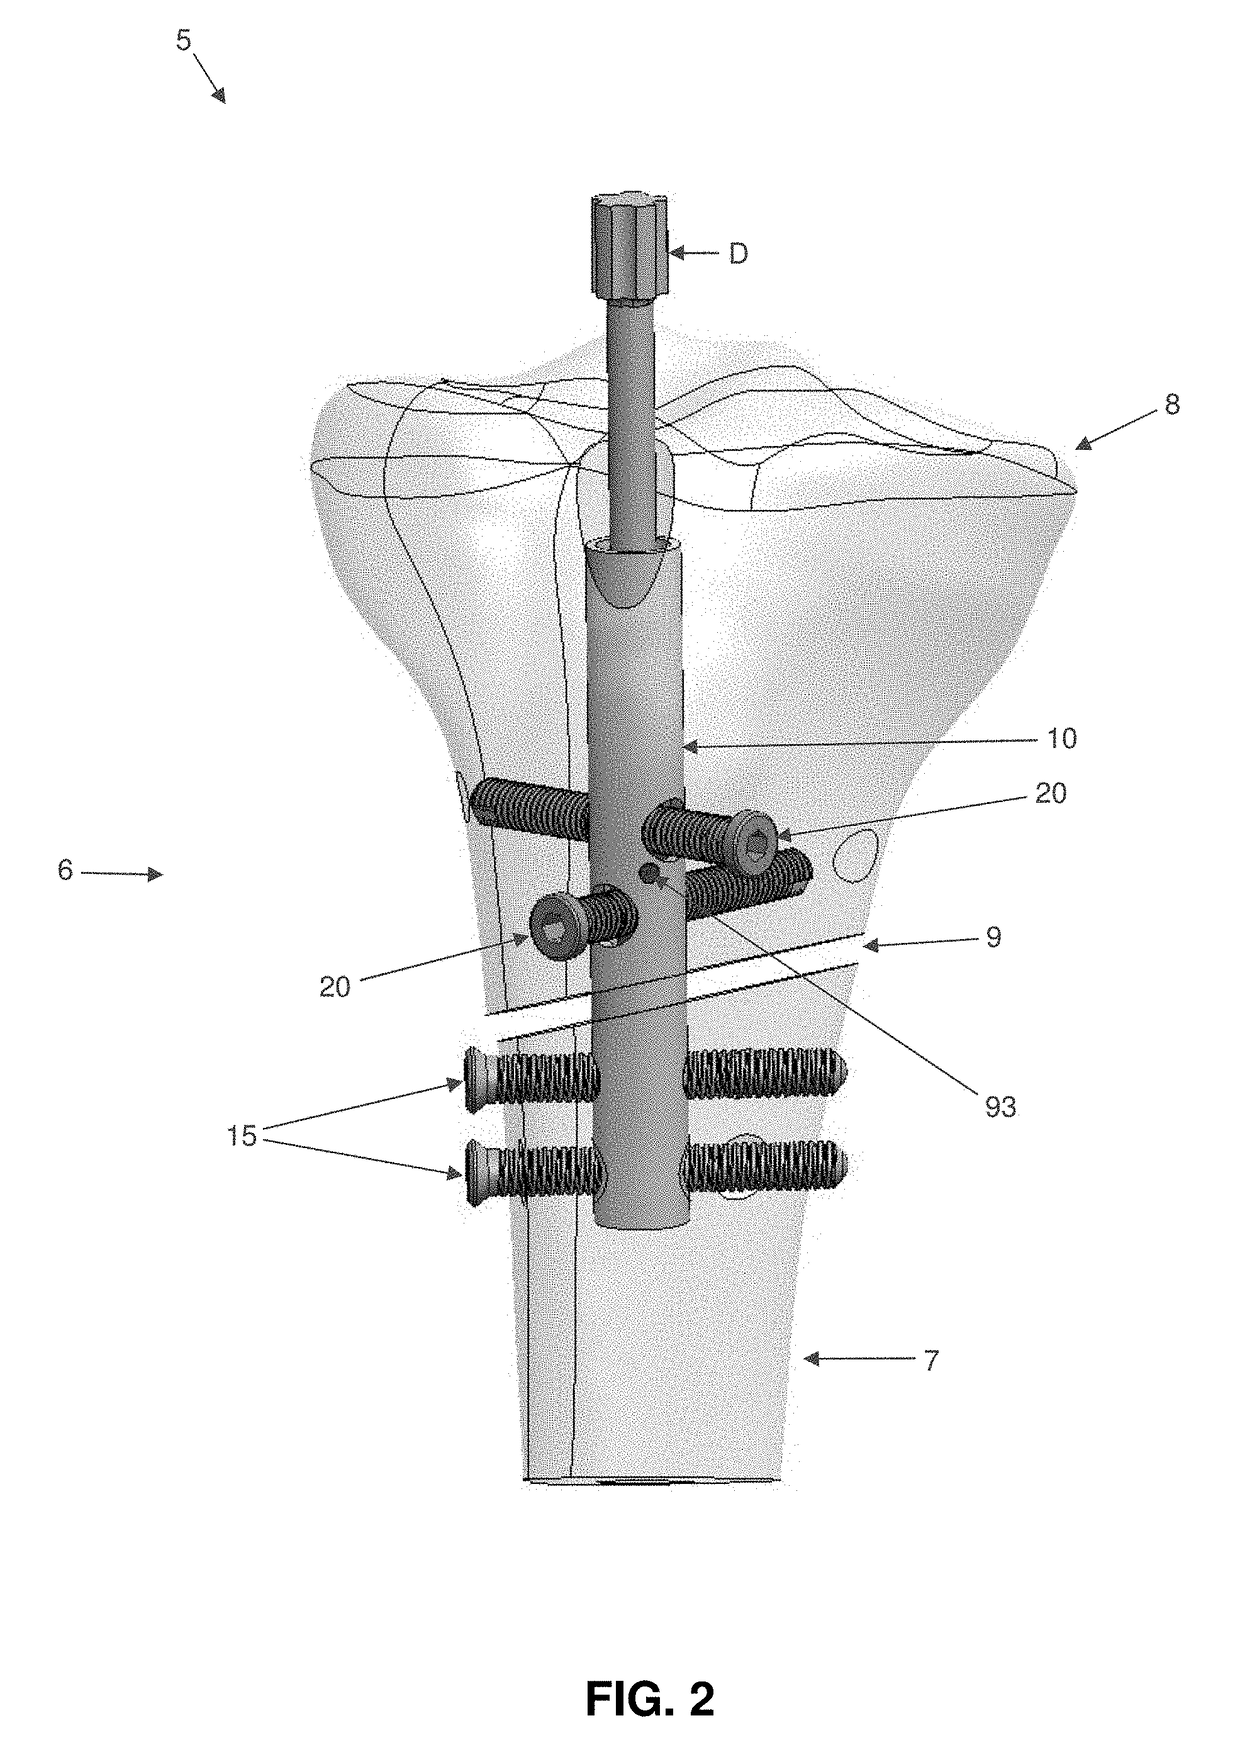 Interlocking intramedullary rod assembly for treating proximal tibial fractures